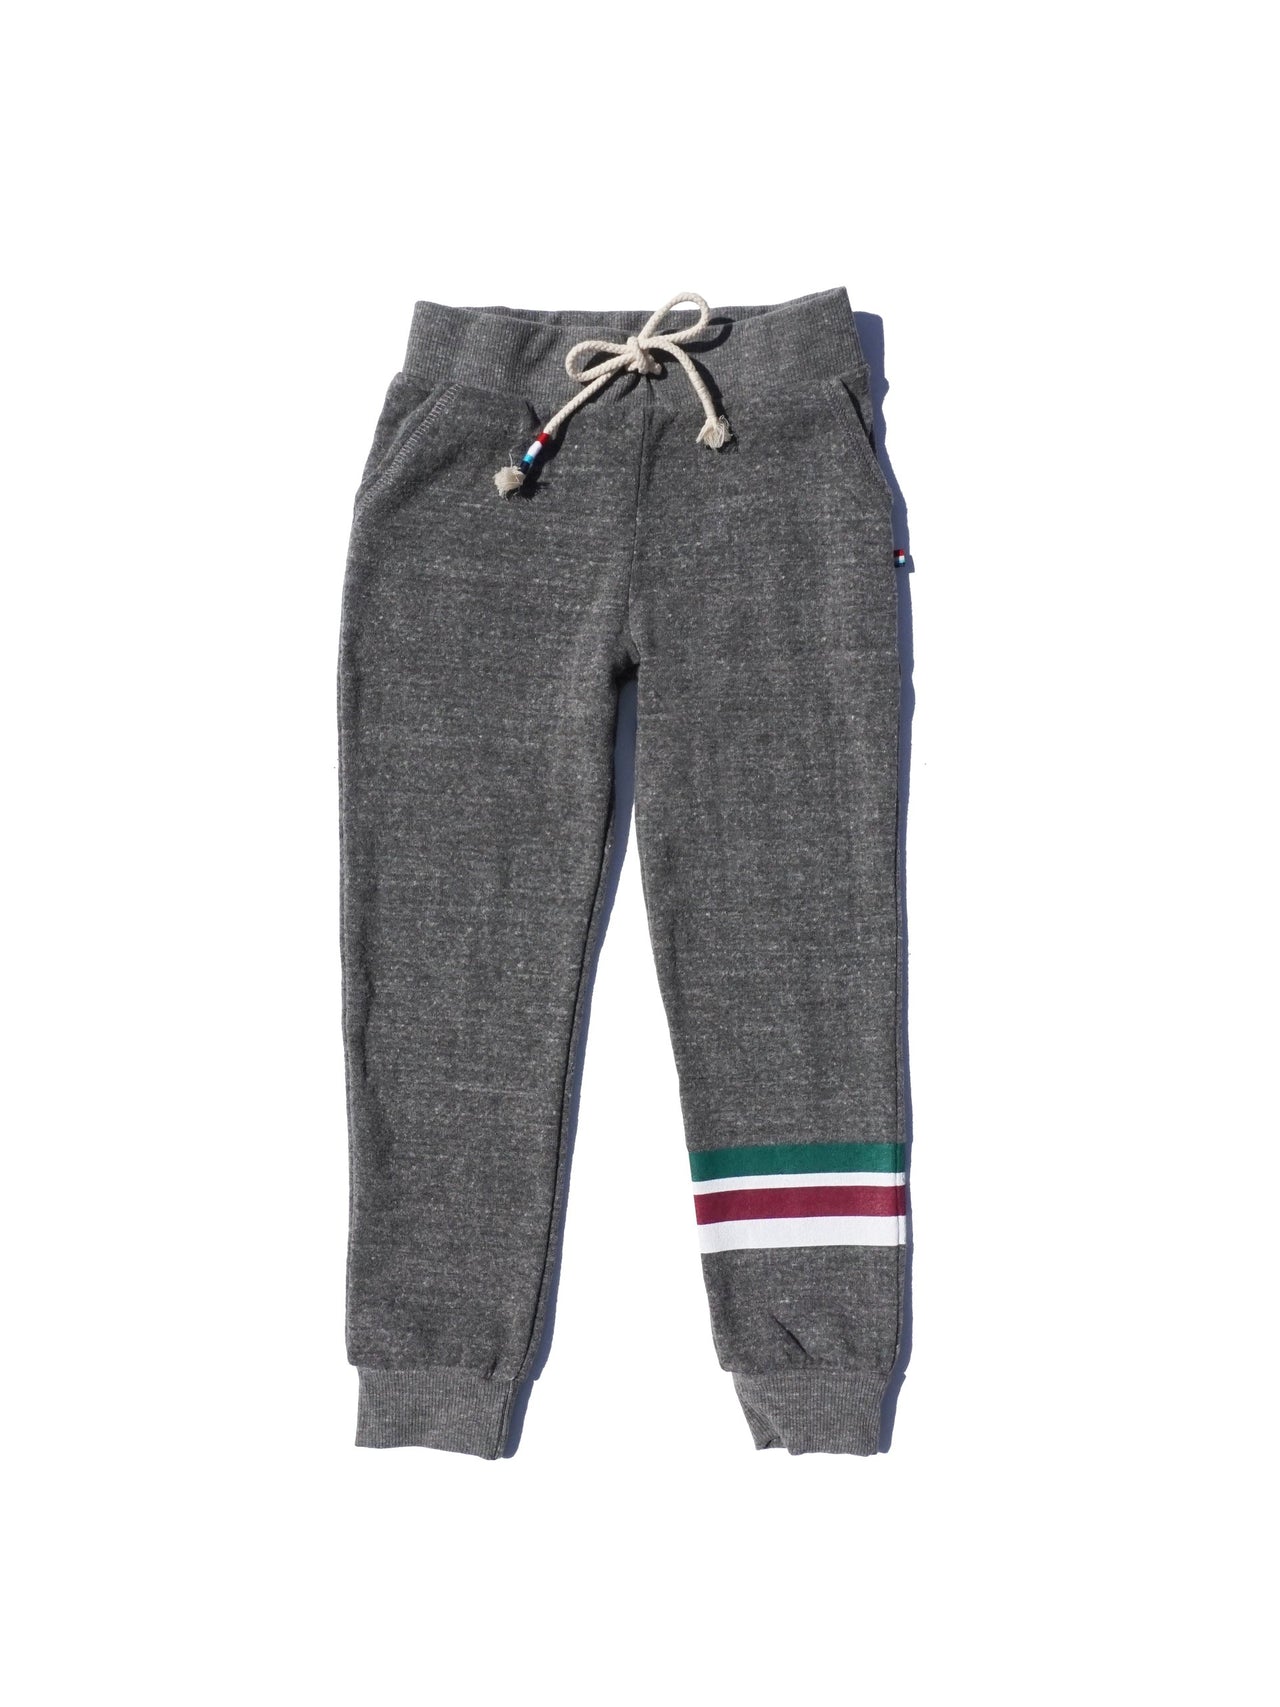 SOL ANGELES KIDS HOLIDAY STRIPE JOGGER